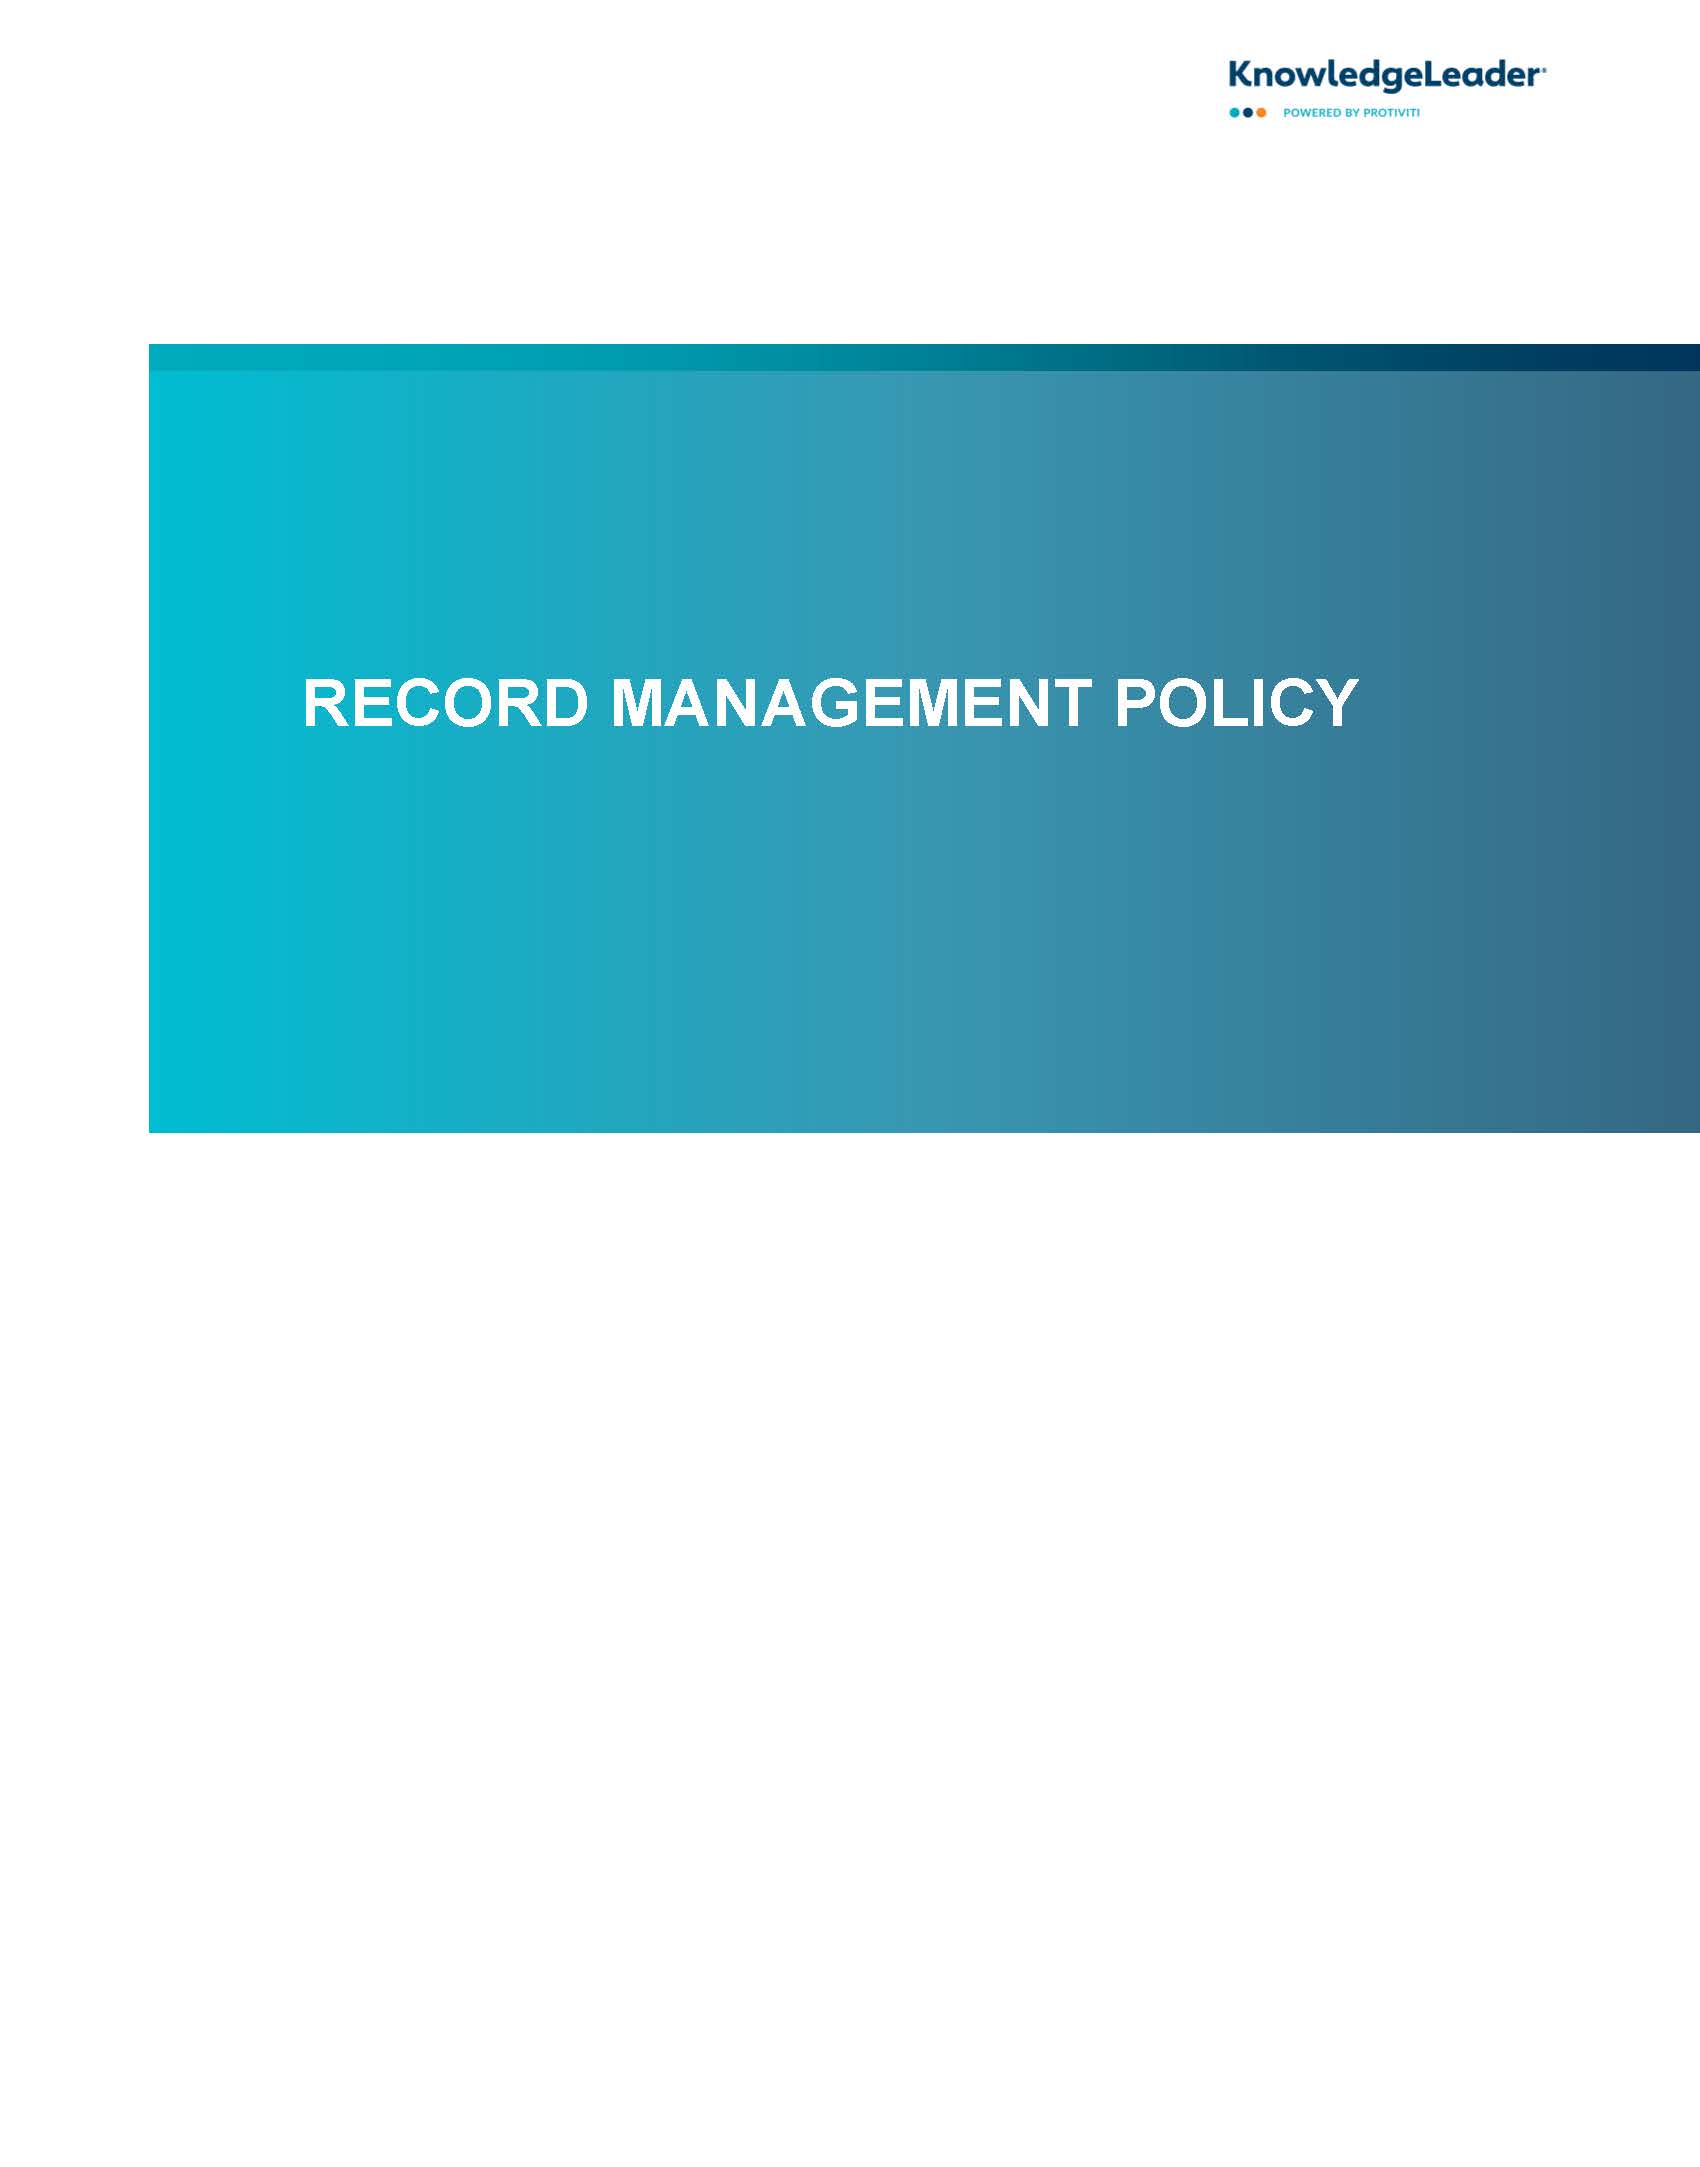 Screenshot of the first page of Record Management Policy